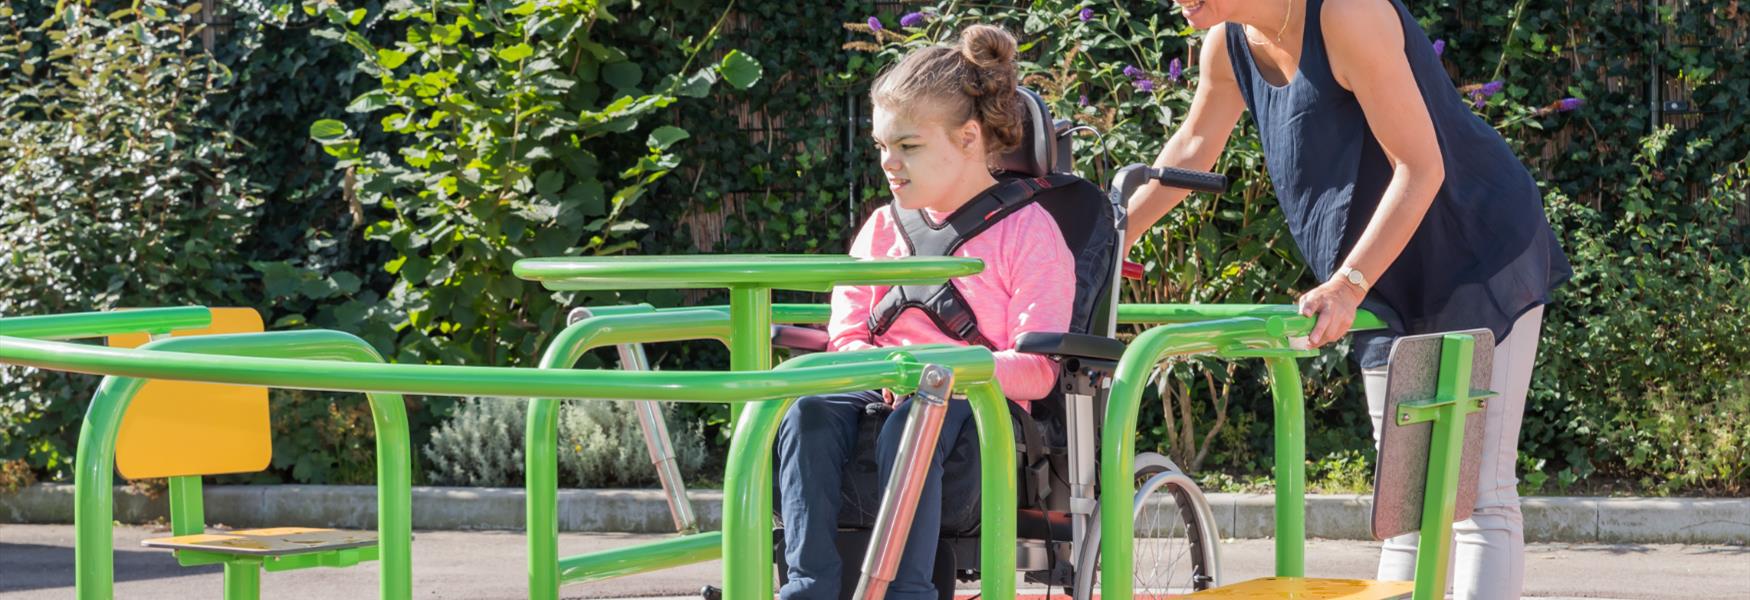 Child in wheelchair playing on accessible play equipment